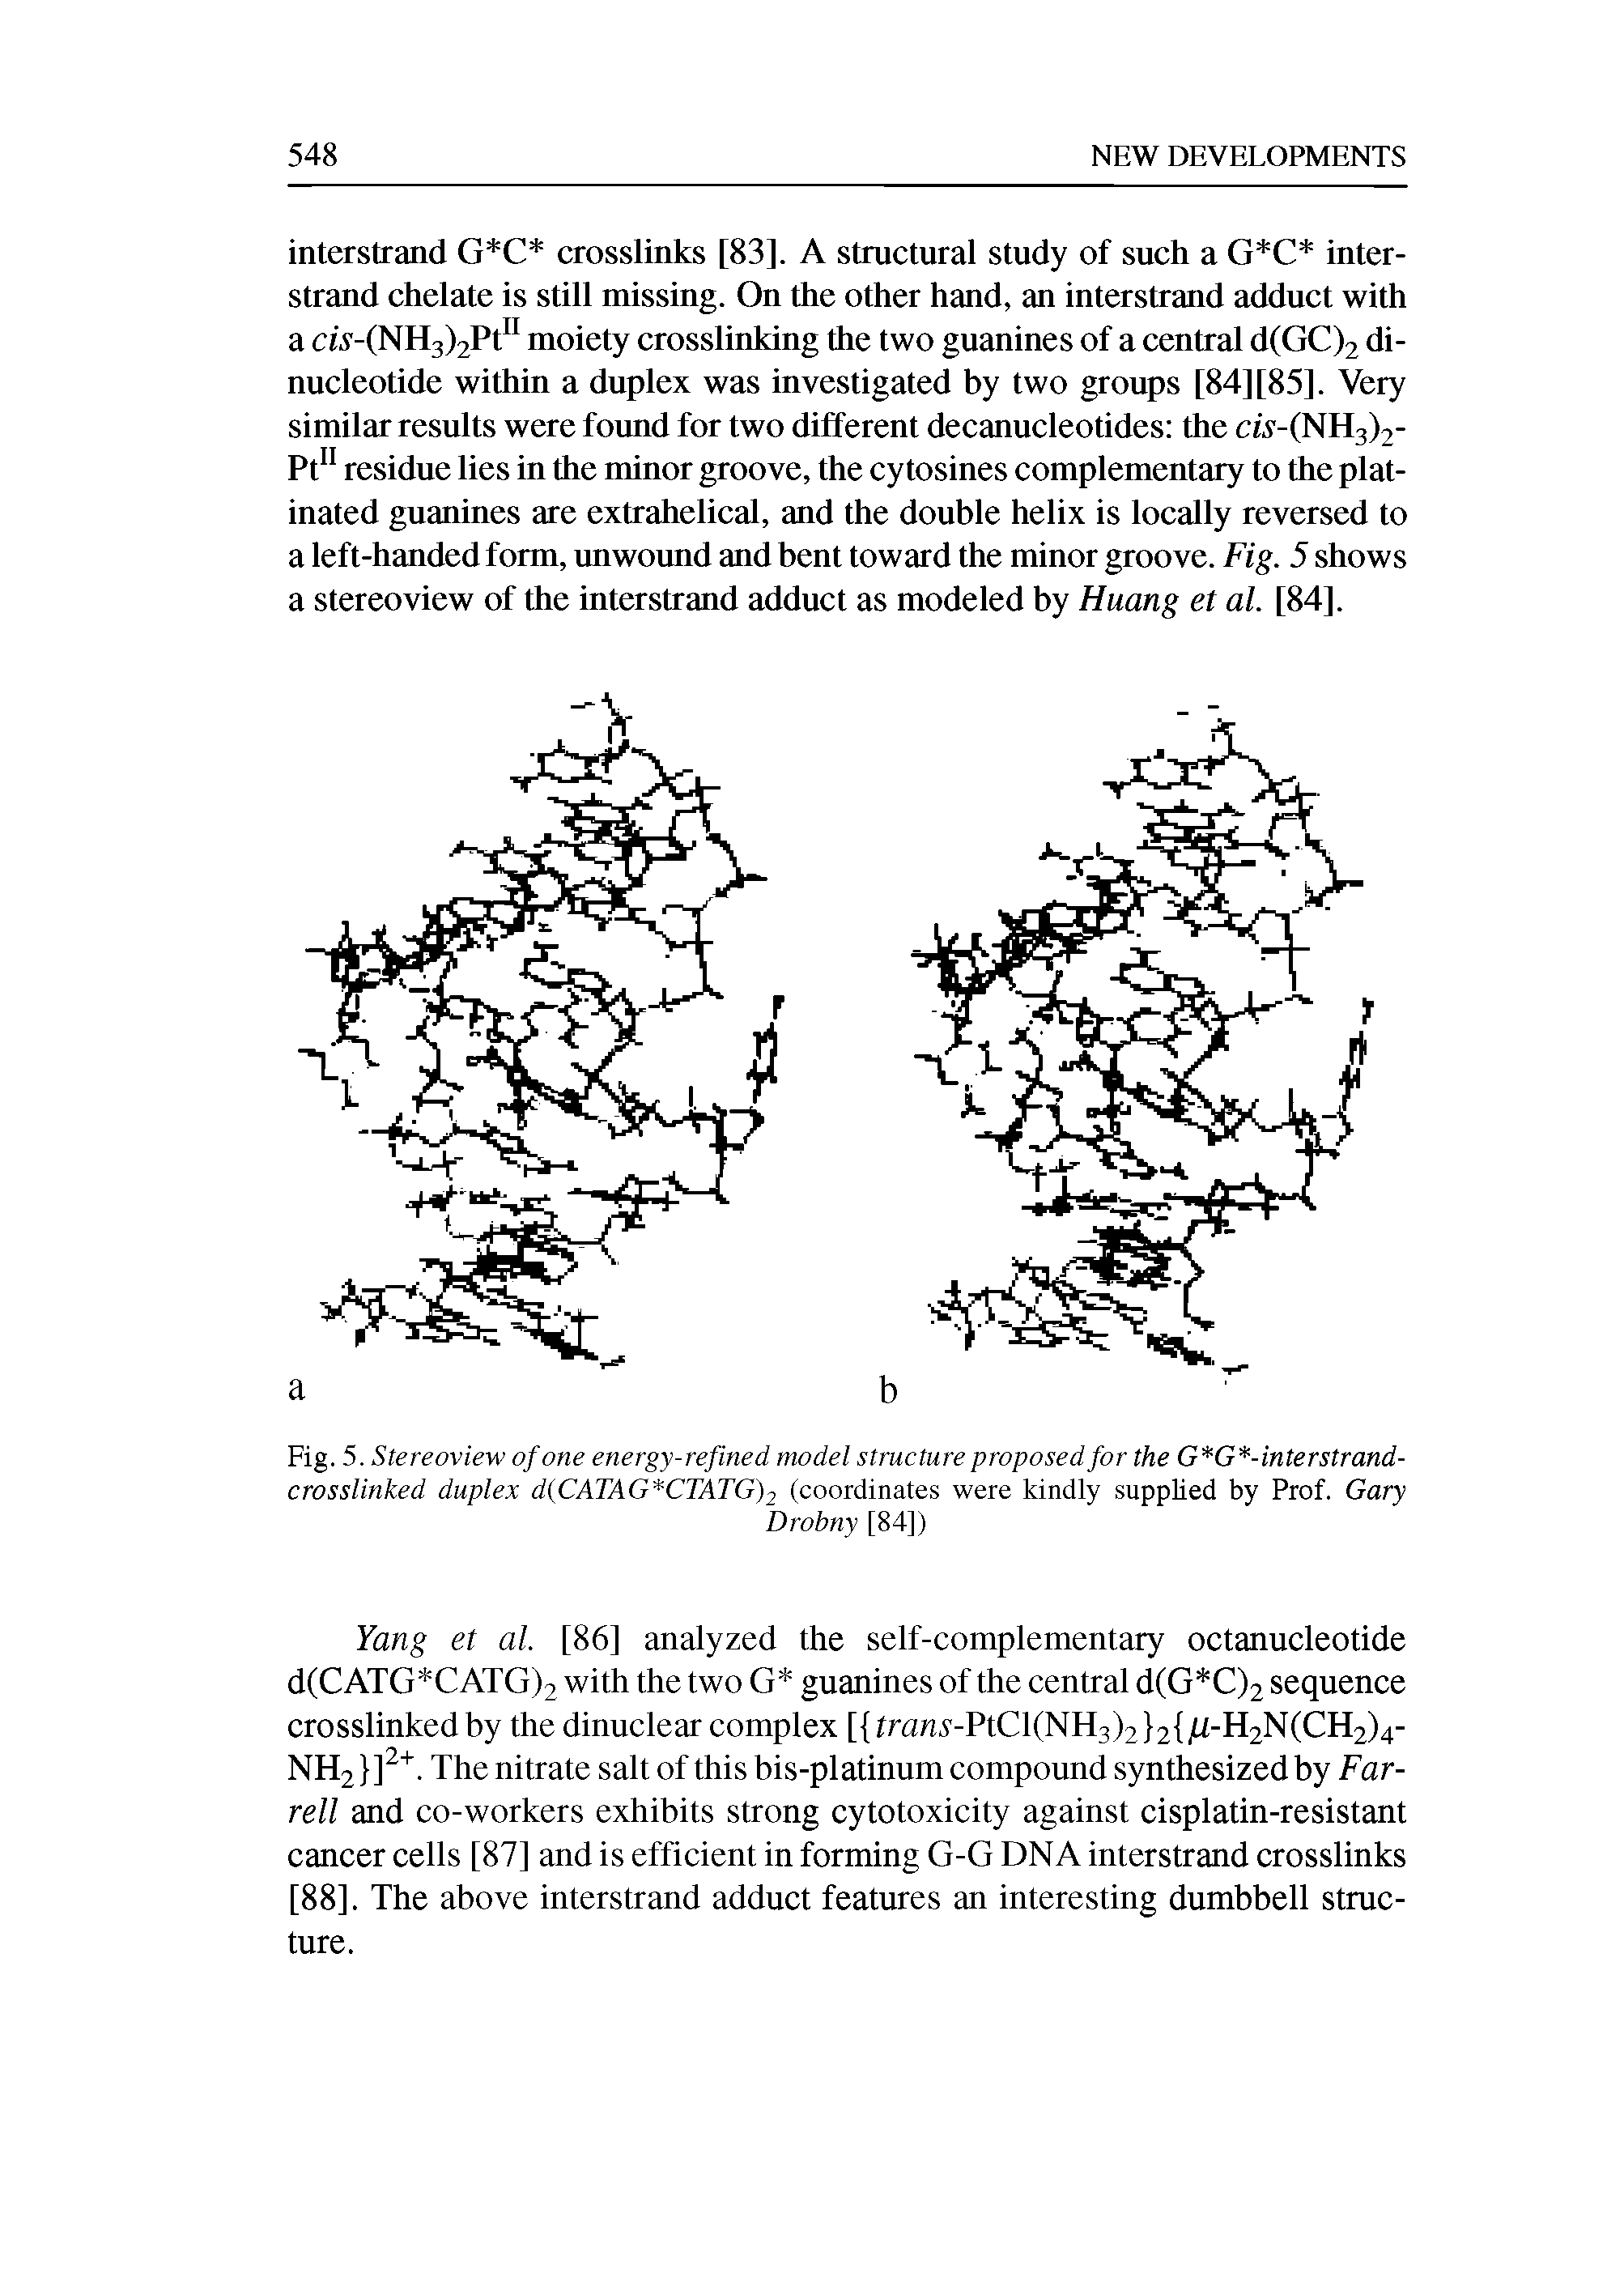 Fig. 5. Stereoview of one energy-refined model structure proposed for the G G -interstrand-crosslinked duplex d(CATAG CTATG)2 (coordinates were kindly supplied by Prof. Gary...